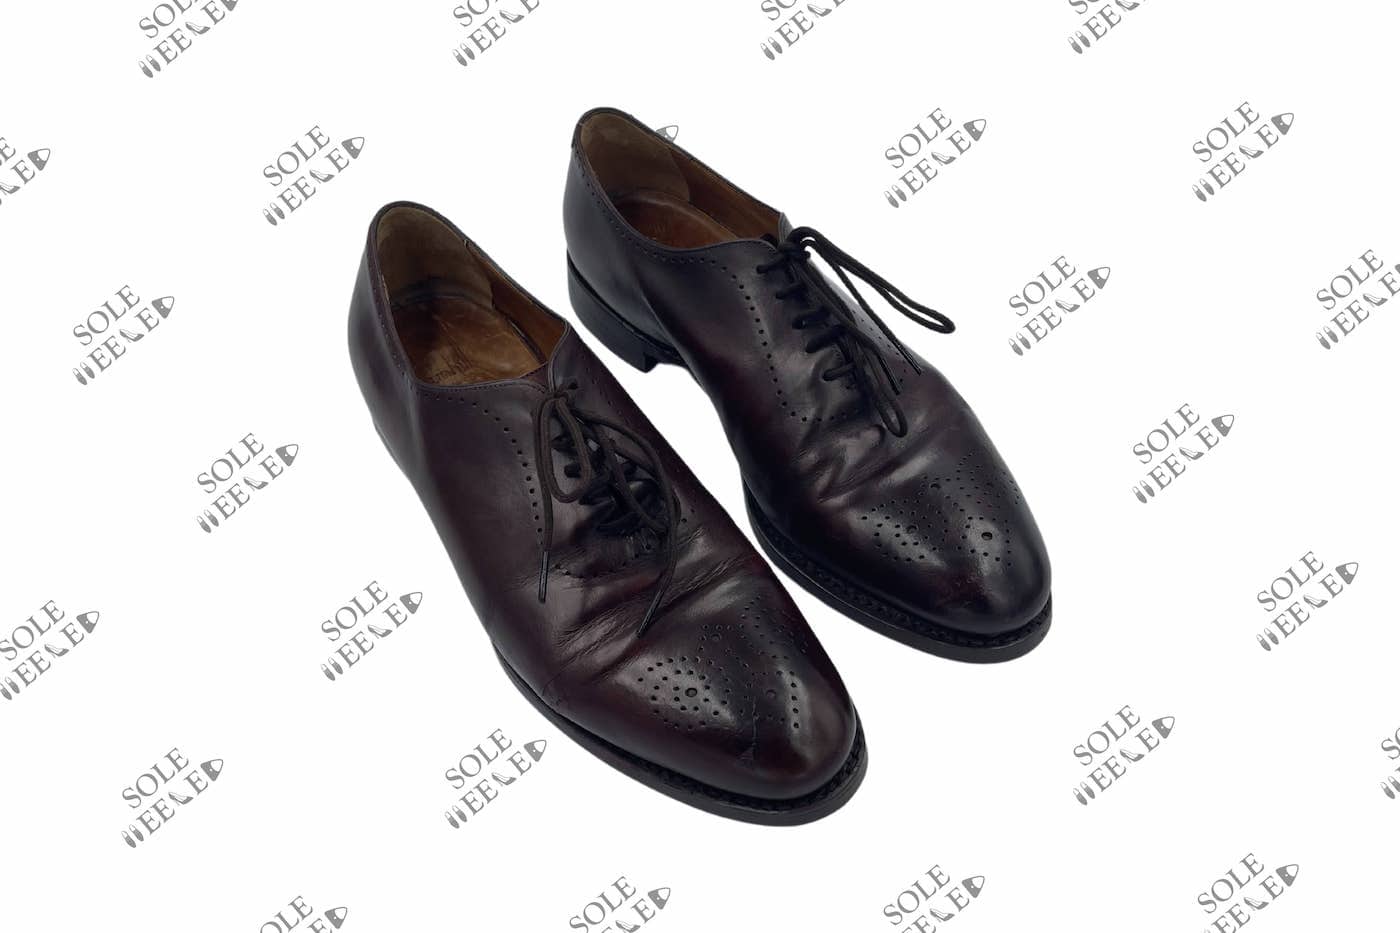 Dunhill Shoe Full JR Leather Resole